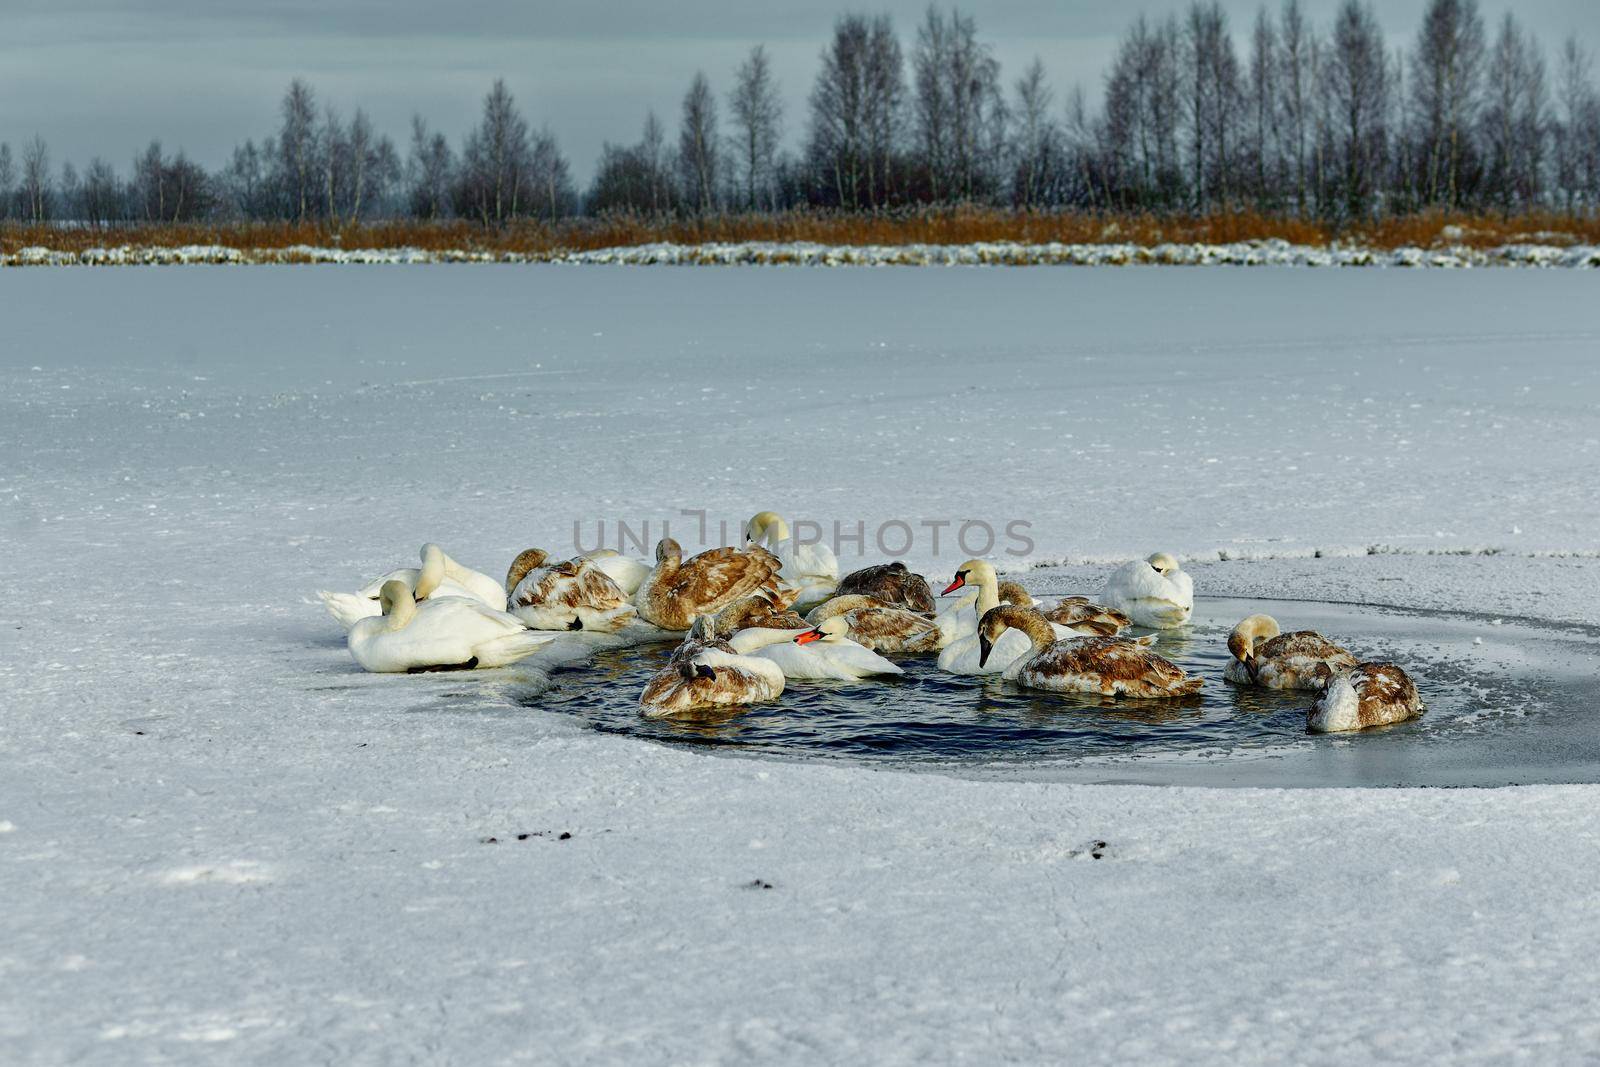 Swans freeze from cold on a winter ice lake by AliaksandrFilimonau